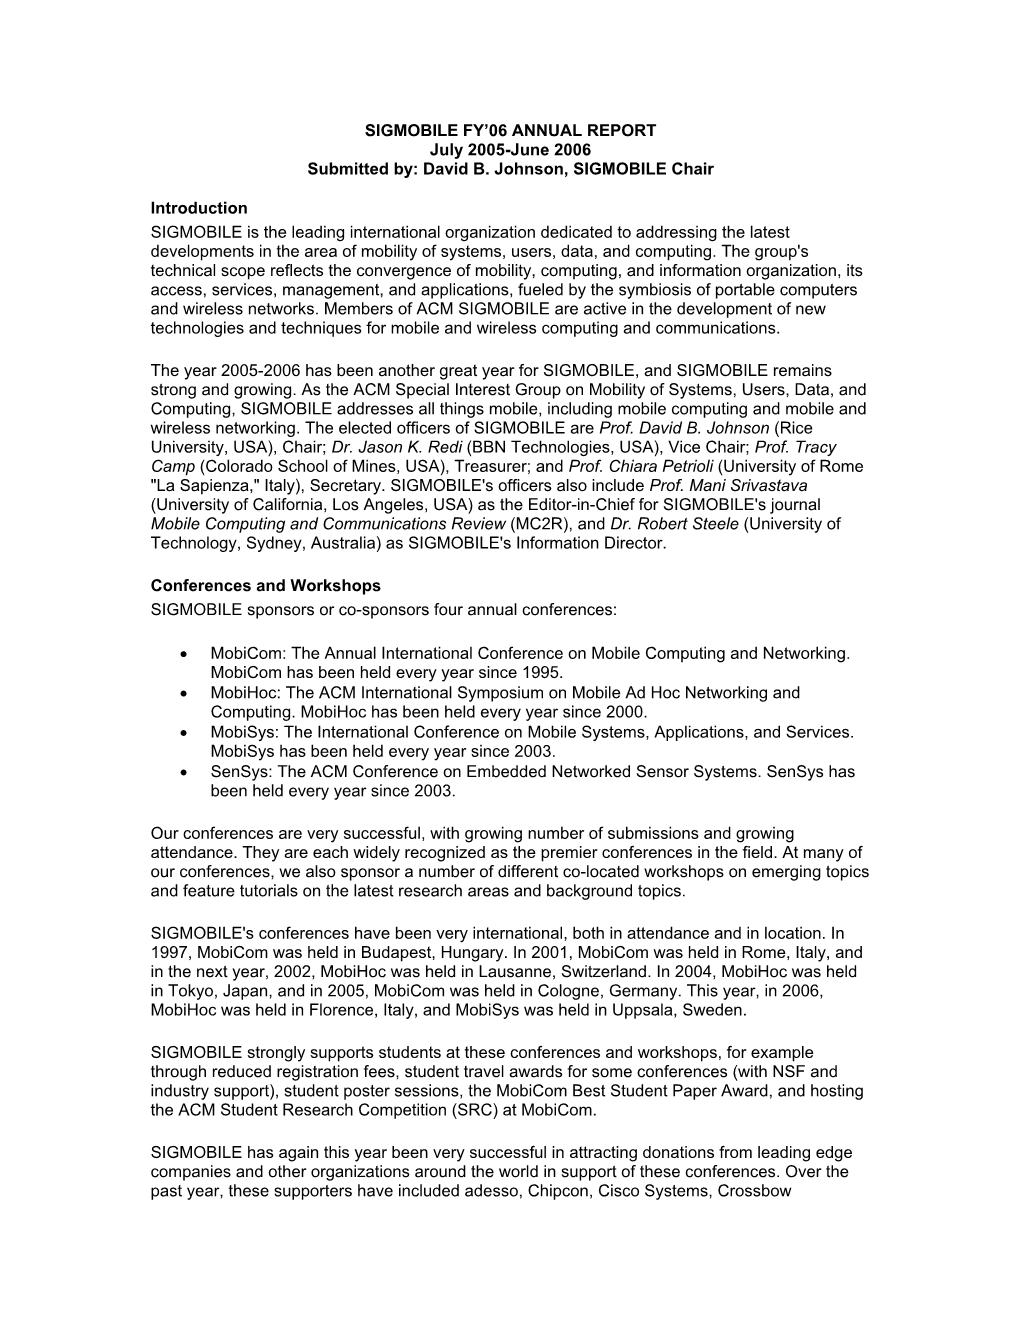 SIGMOBILE FY’06 ANNUAL REPORT July 2005-June 2006 Submitted By: David B